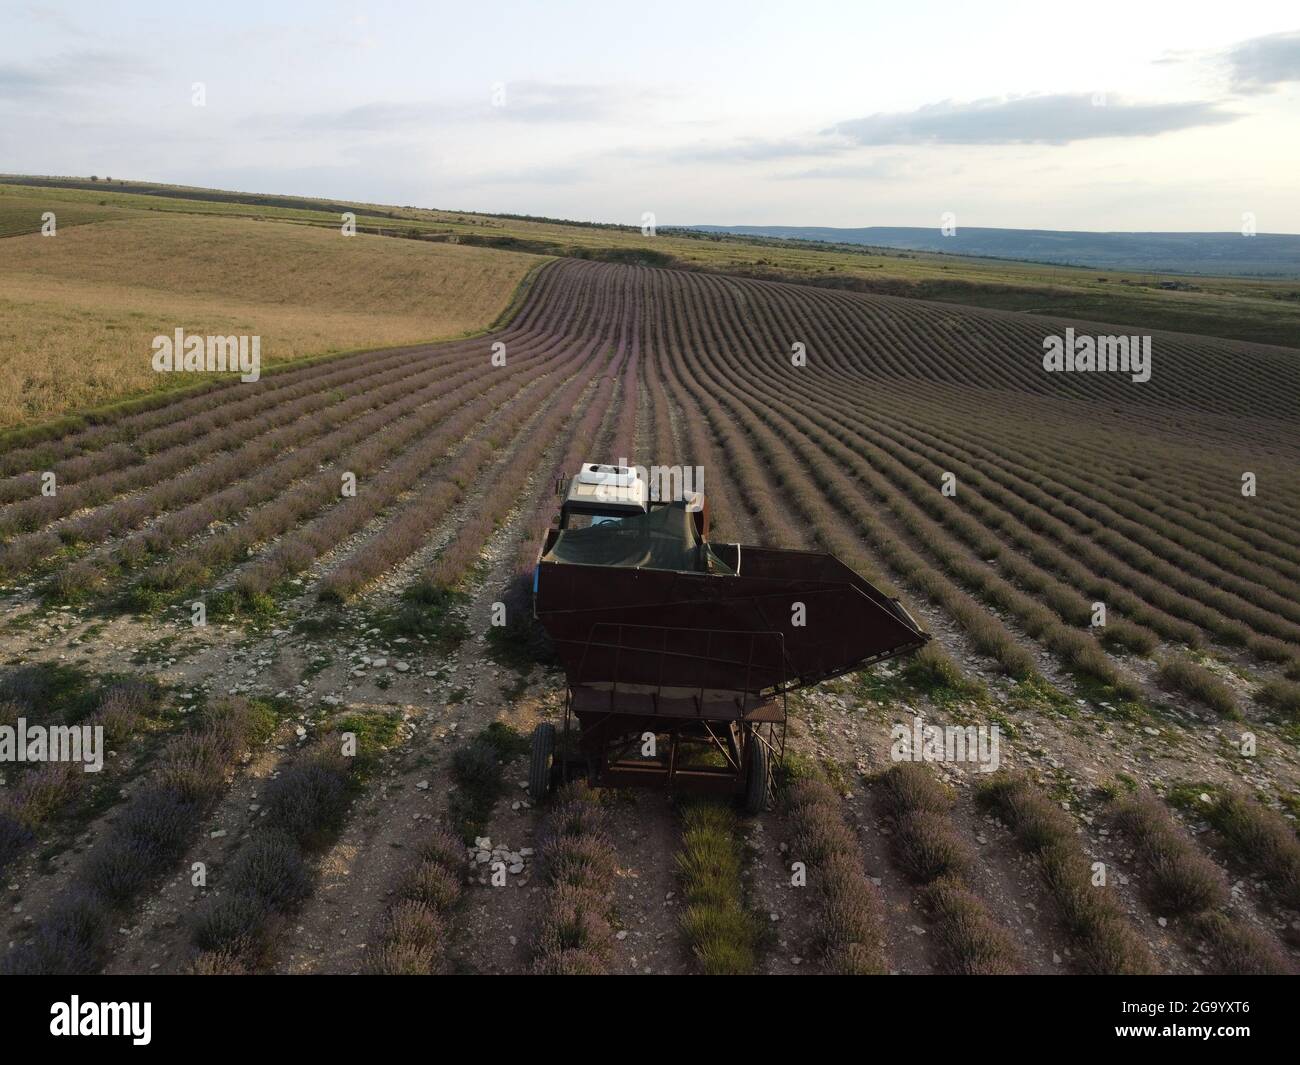 Aerial drone view of a tractor harvesting flowers in a lavender field. Abstract top view of a purple lavender field during harvesting using Stock Photo